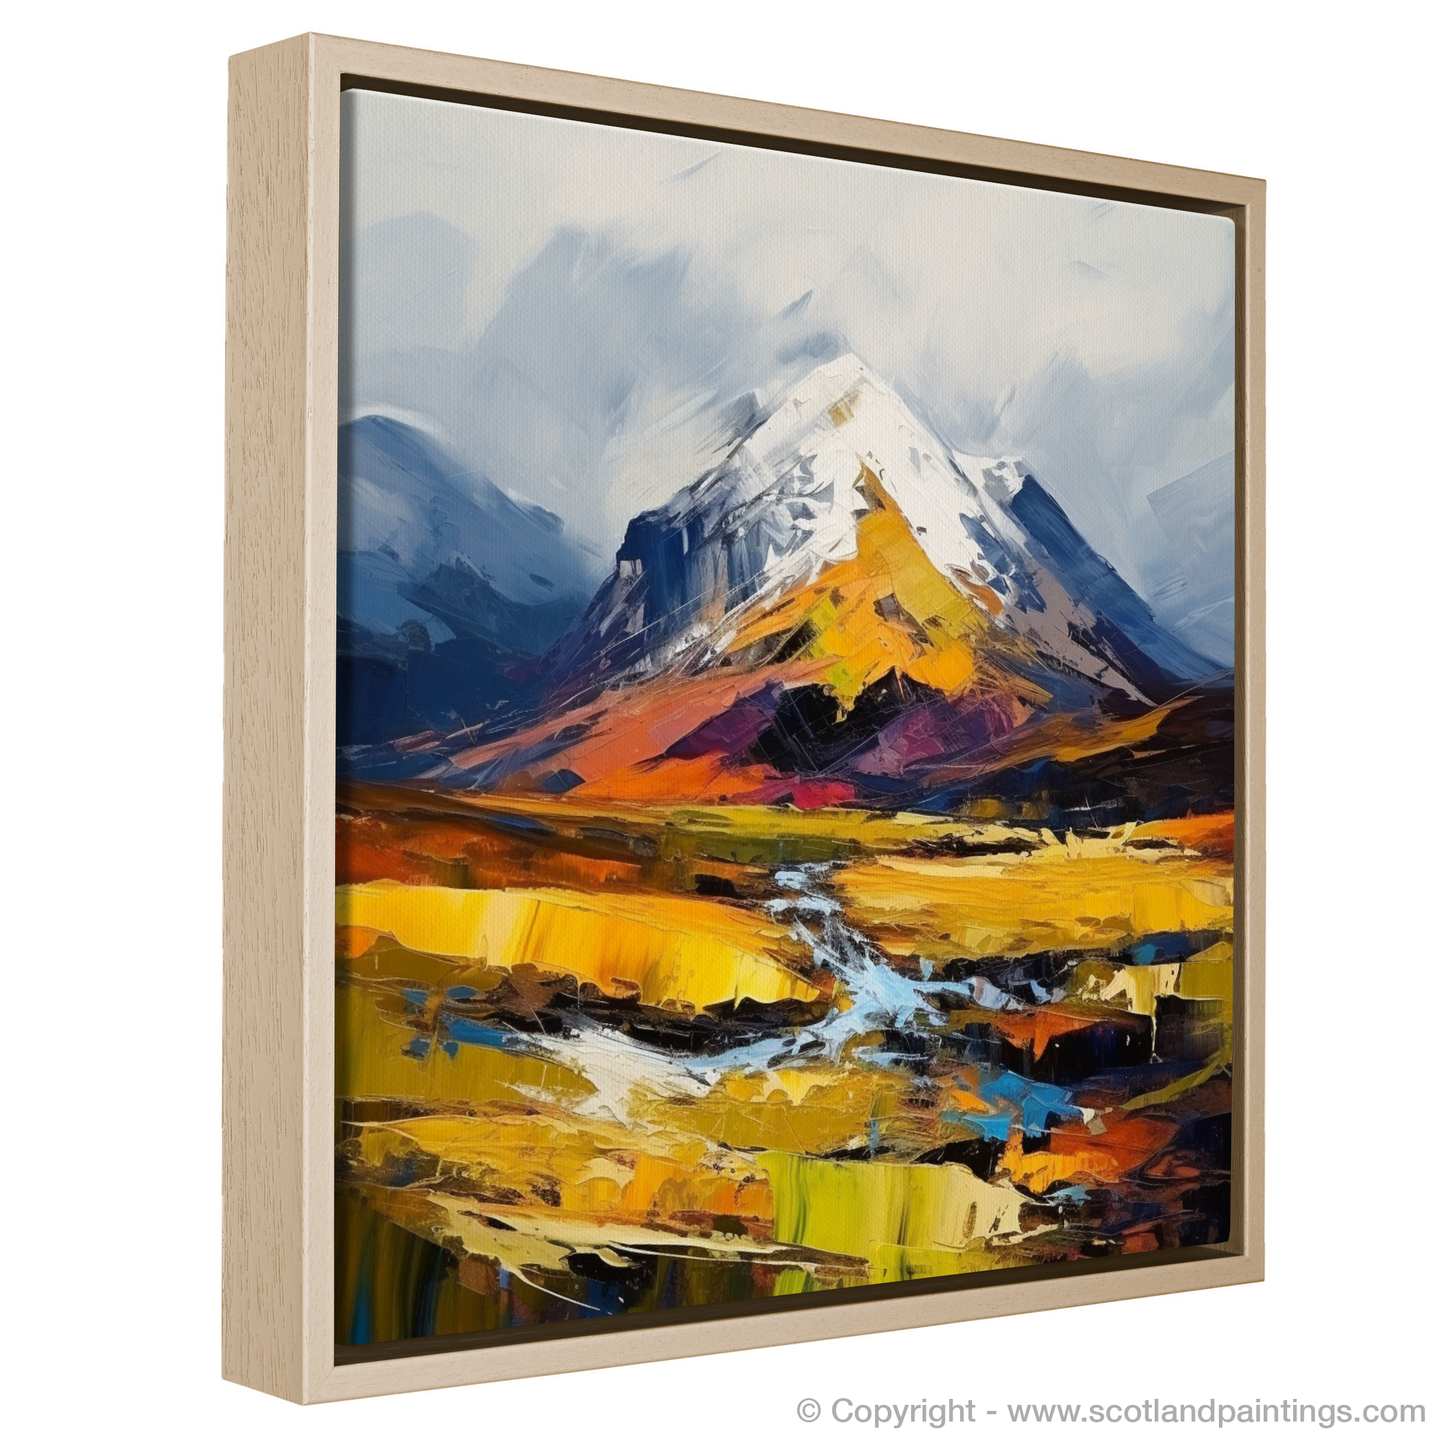 Painting and Art Print of Meall nan Tarmachan entitled "Highland Majesty: Meall nan Tarmachan Unleashed".